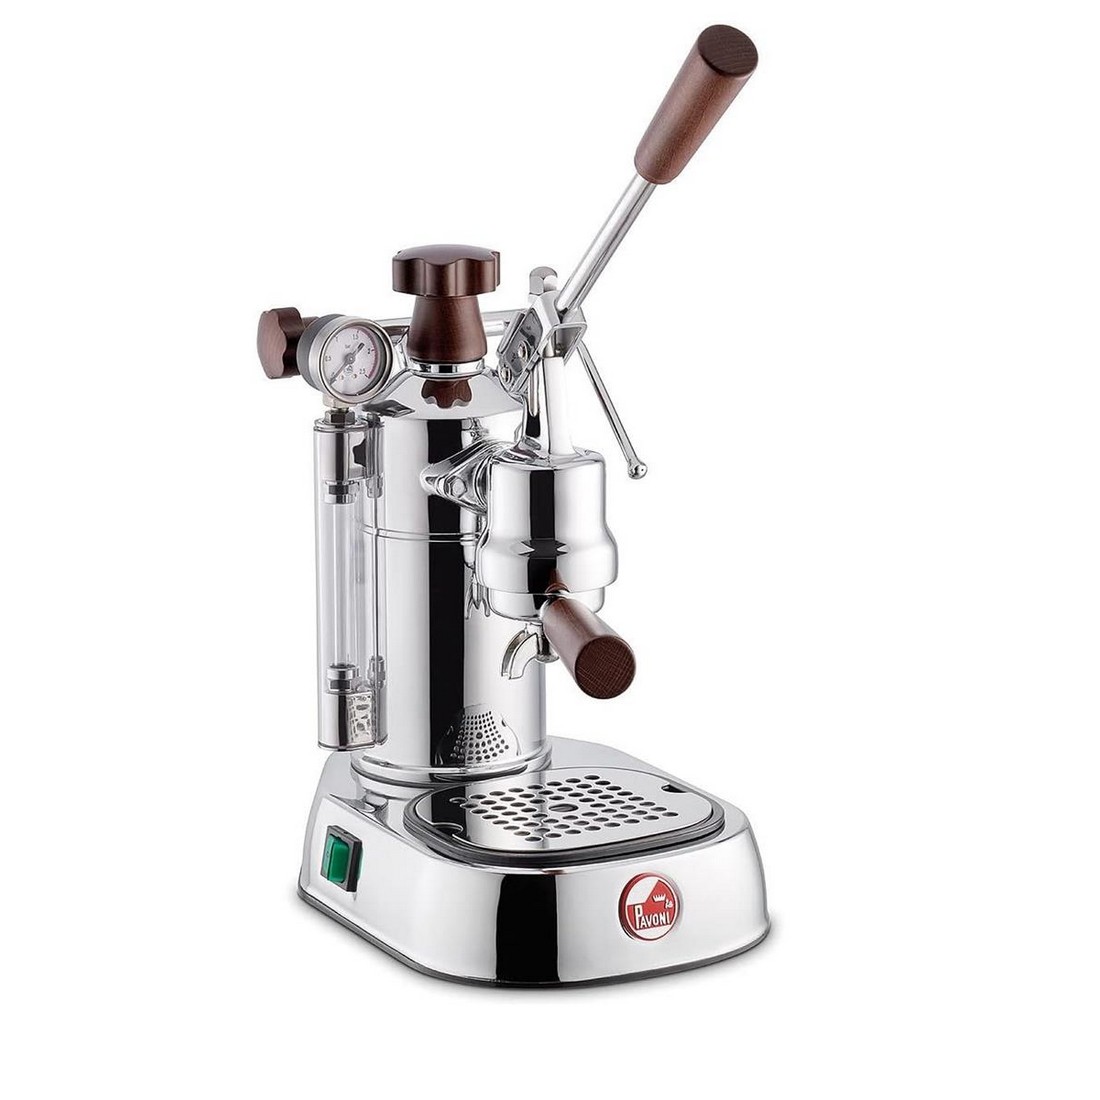 LA PAVONI - Professional LUSSO - Lever machine with wooden handles 230 V